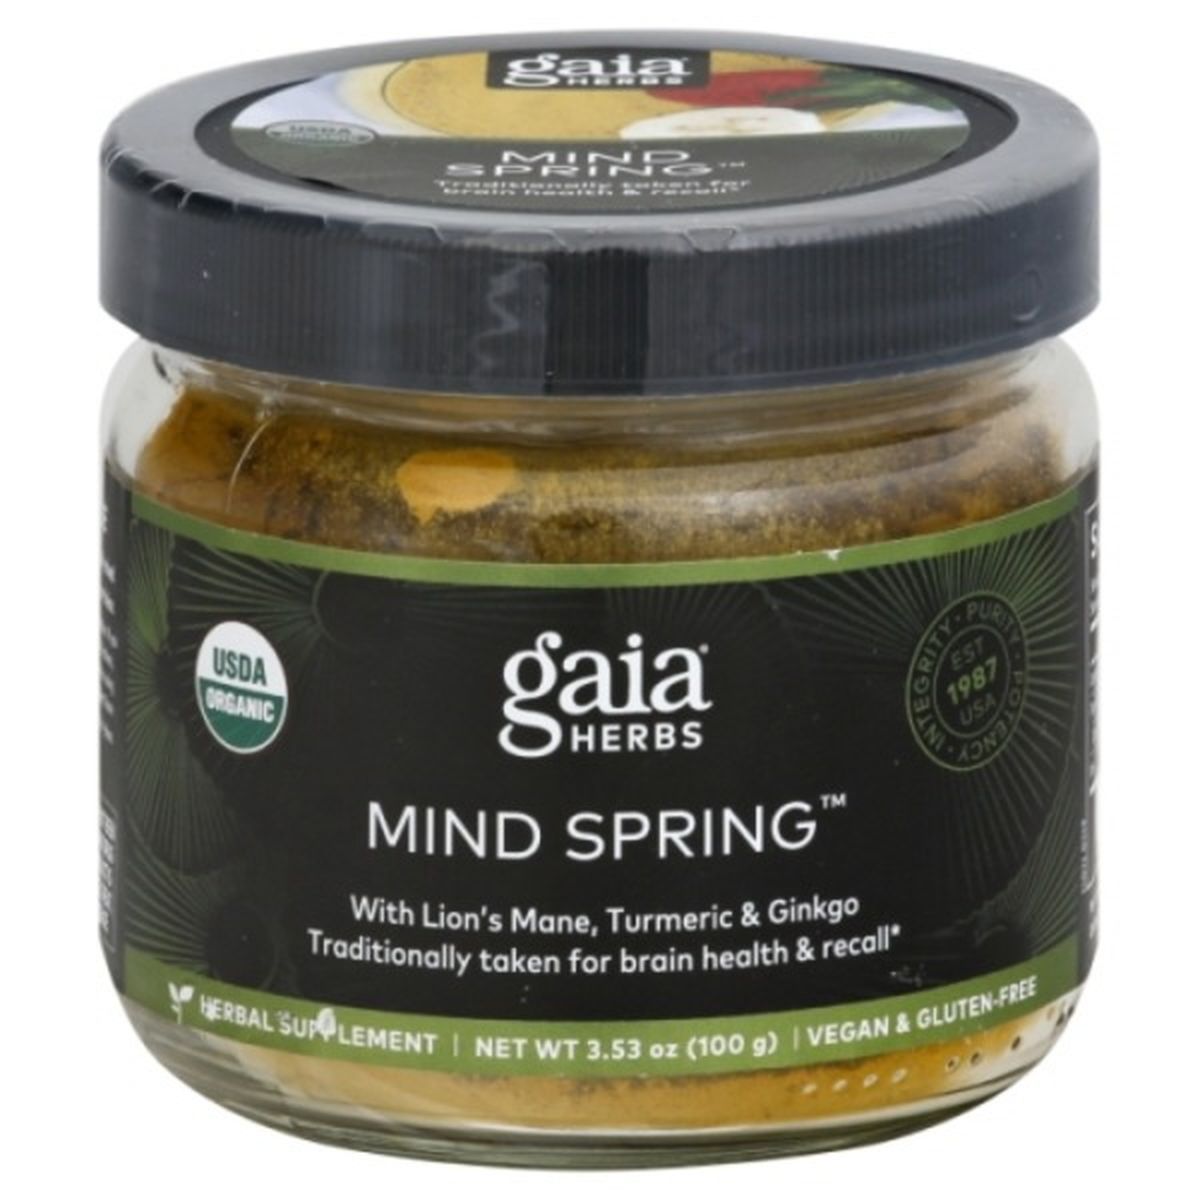 Calories in Gaia Herbs Mind Spring